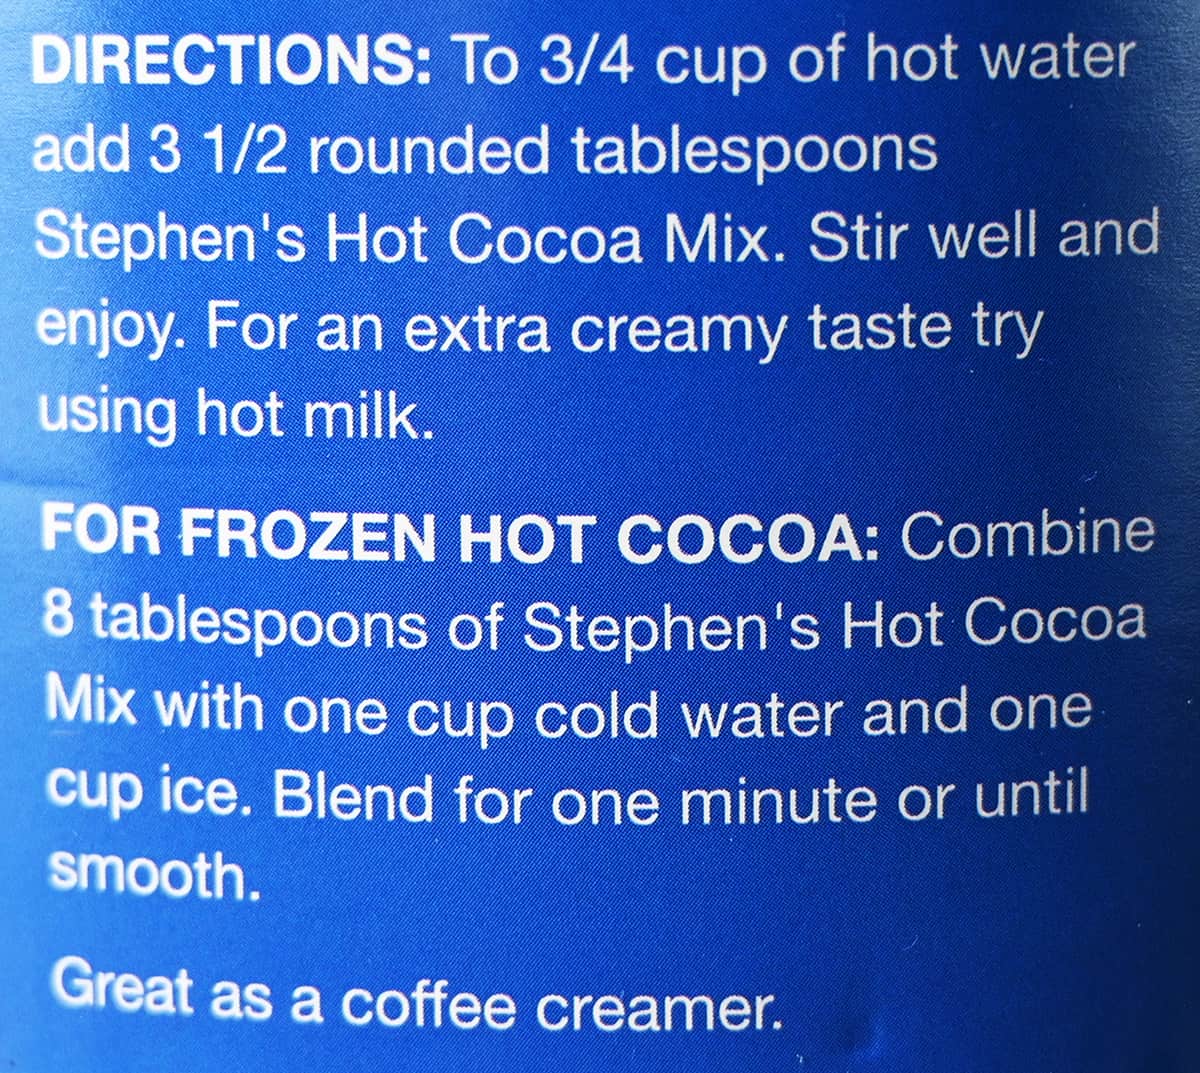 Image of the milk chocolate cocoa directions for mixing from the back of the container.